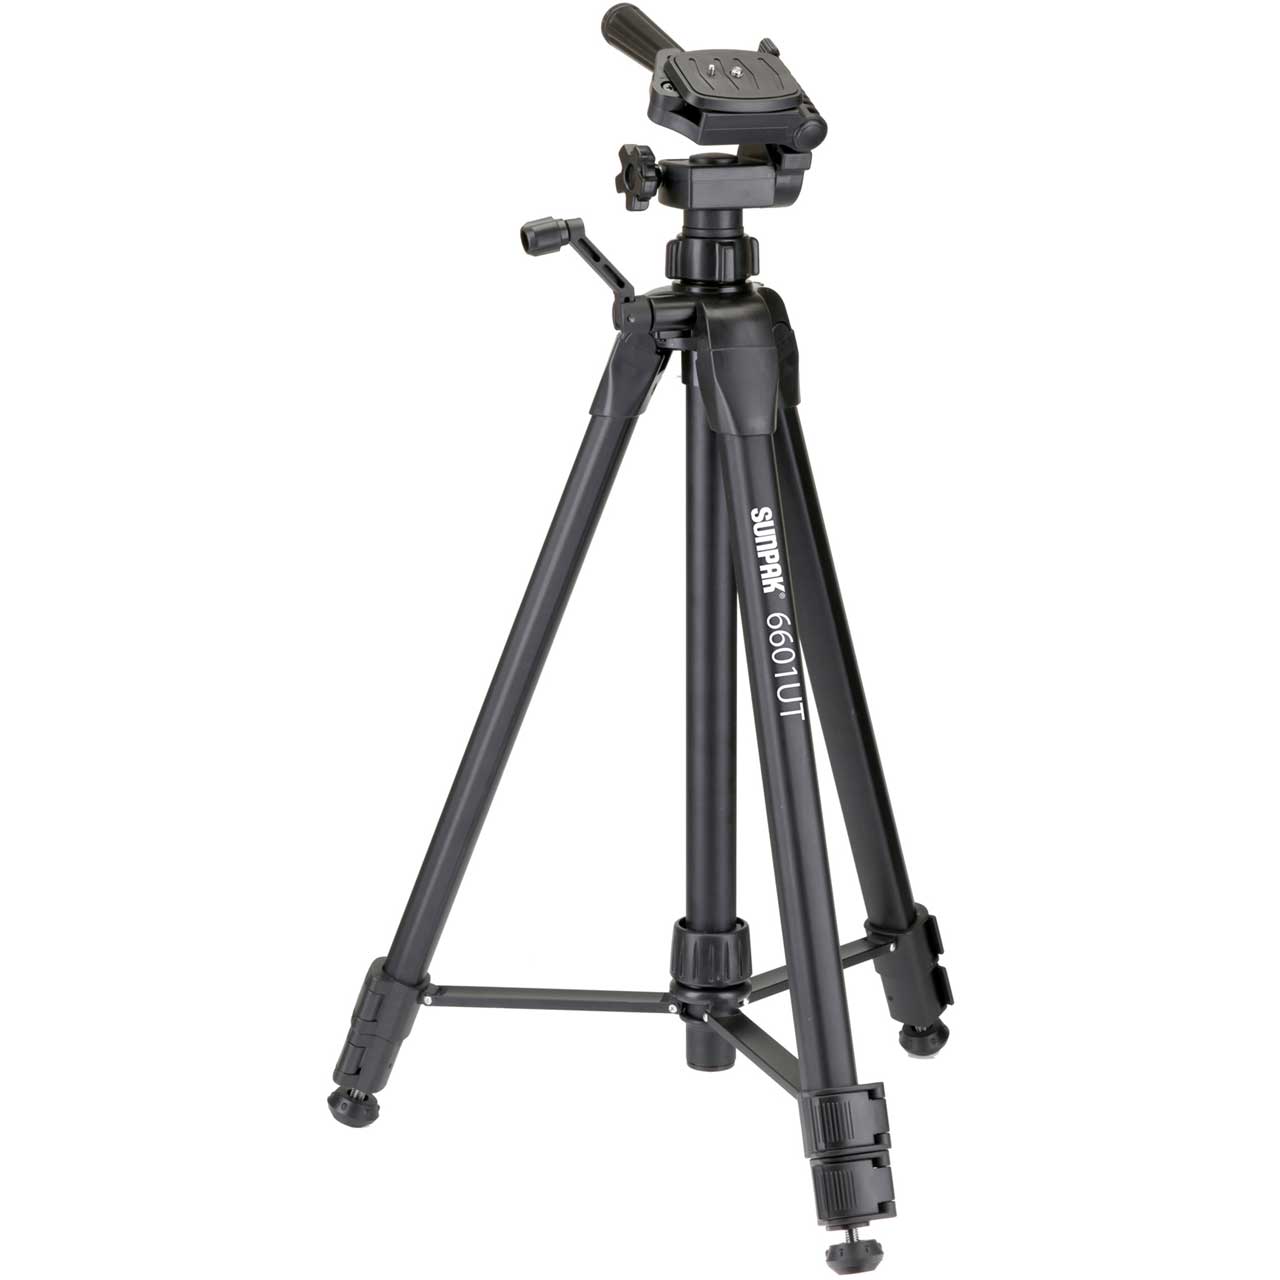 Sunpak 620-060 Tripod with 3-Way Panhead Bubble Level and Quick Release